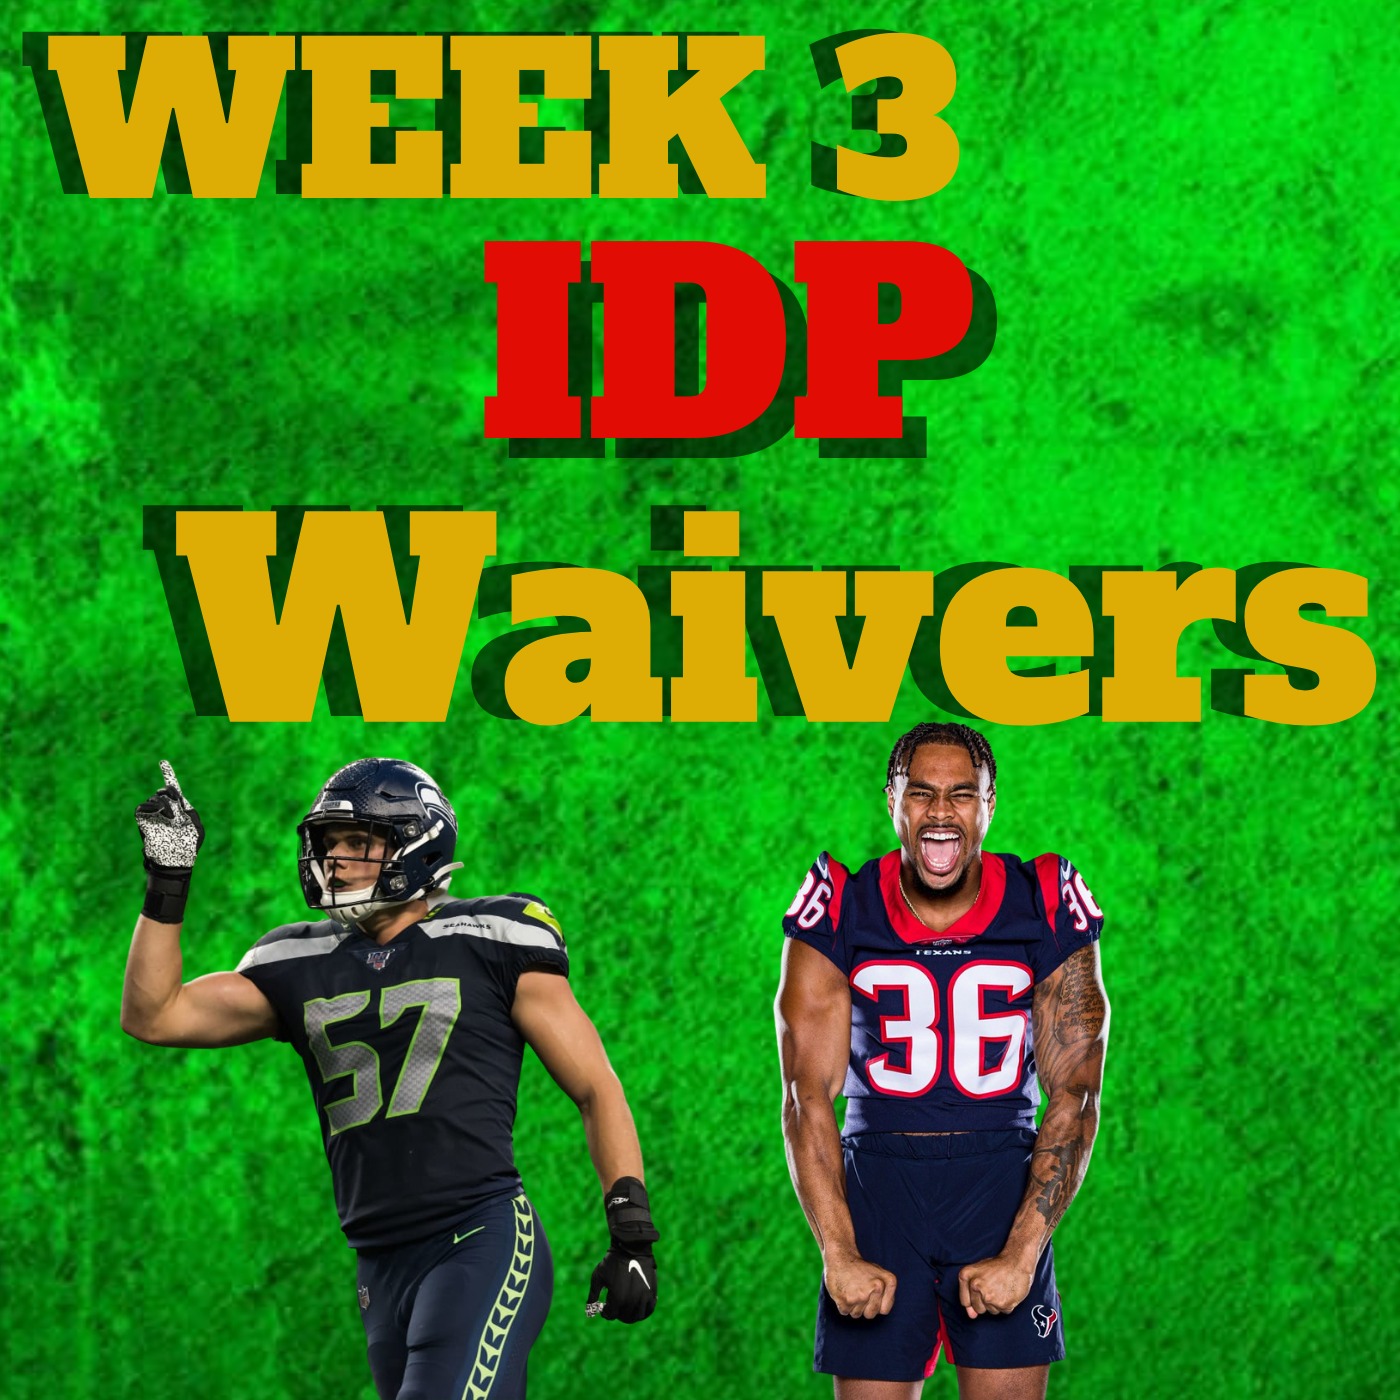 Week 3 IDP Waiver Wire Adds